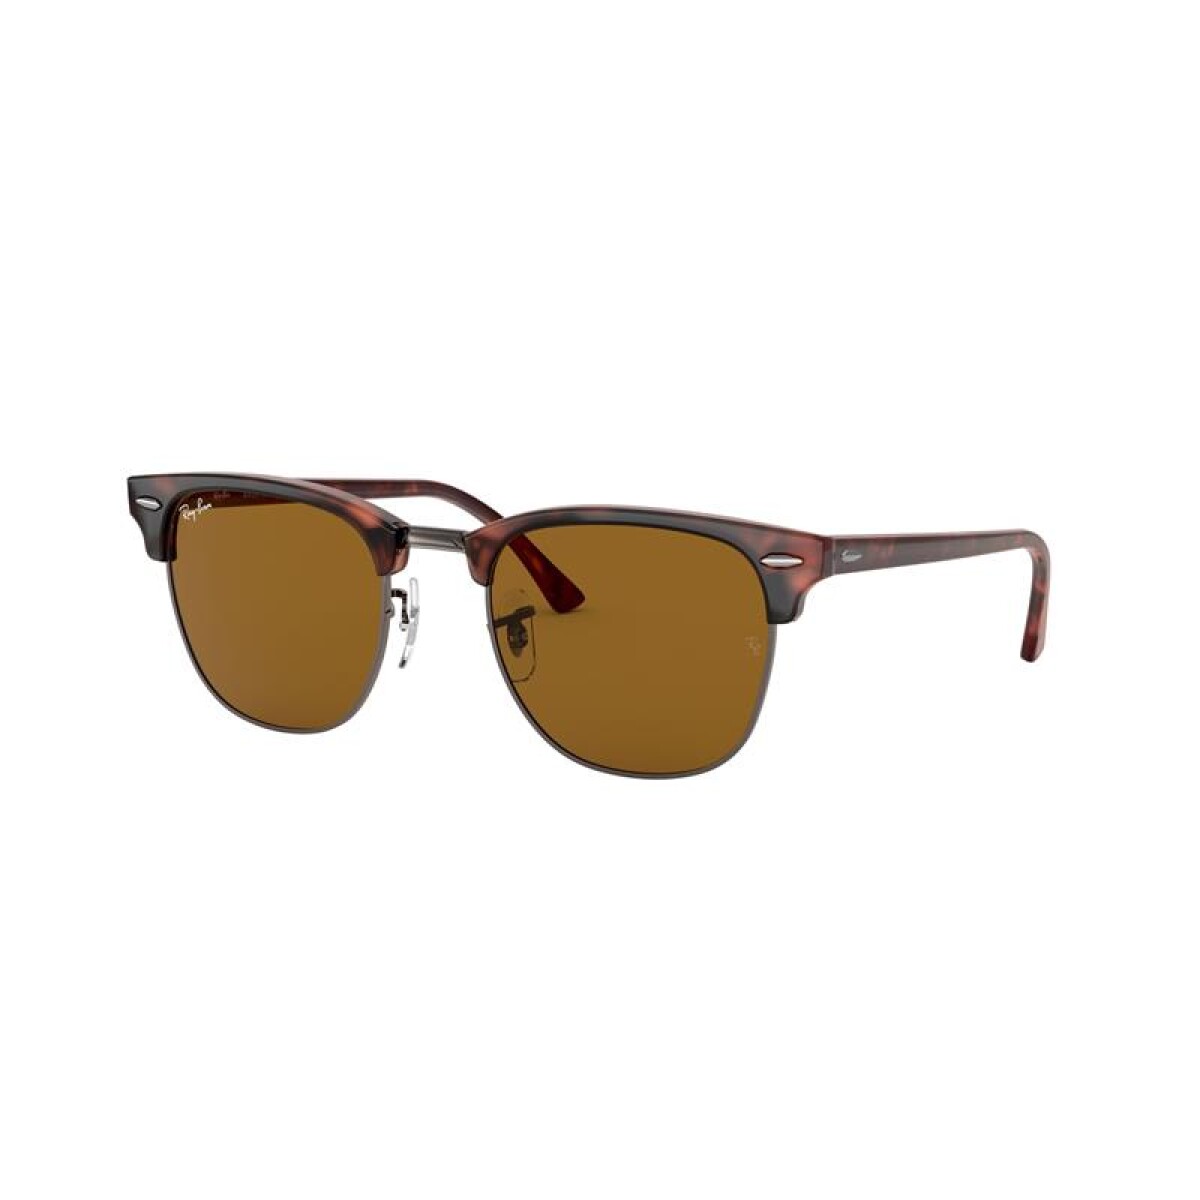 Ray Ban Rb3016 - W3388 